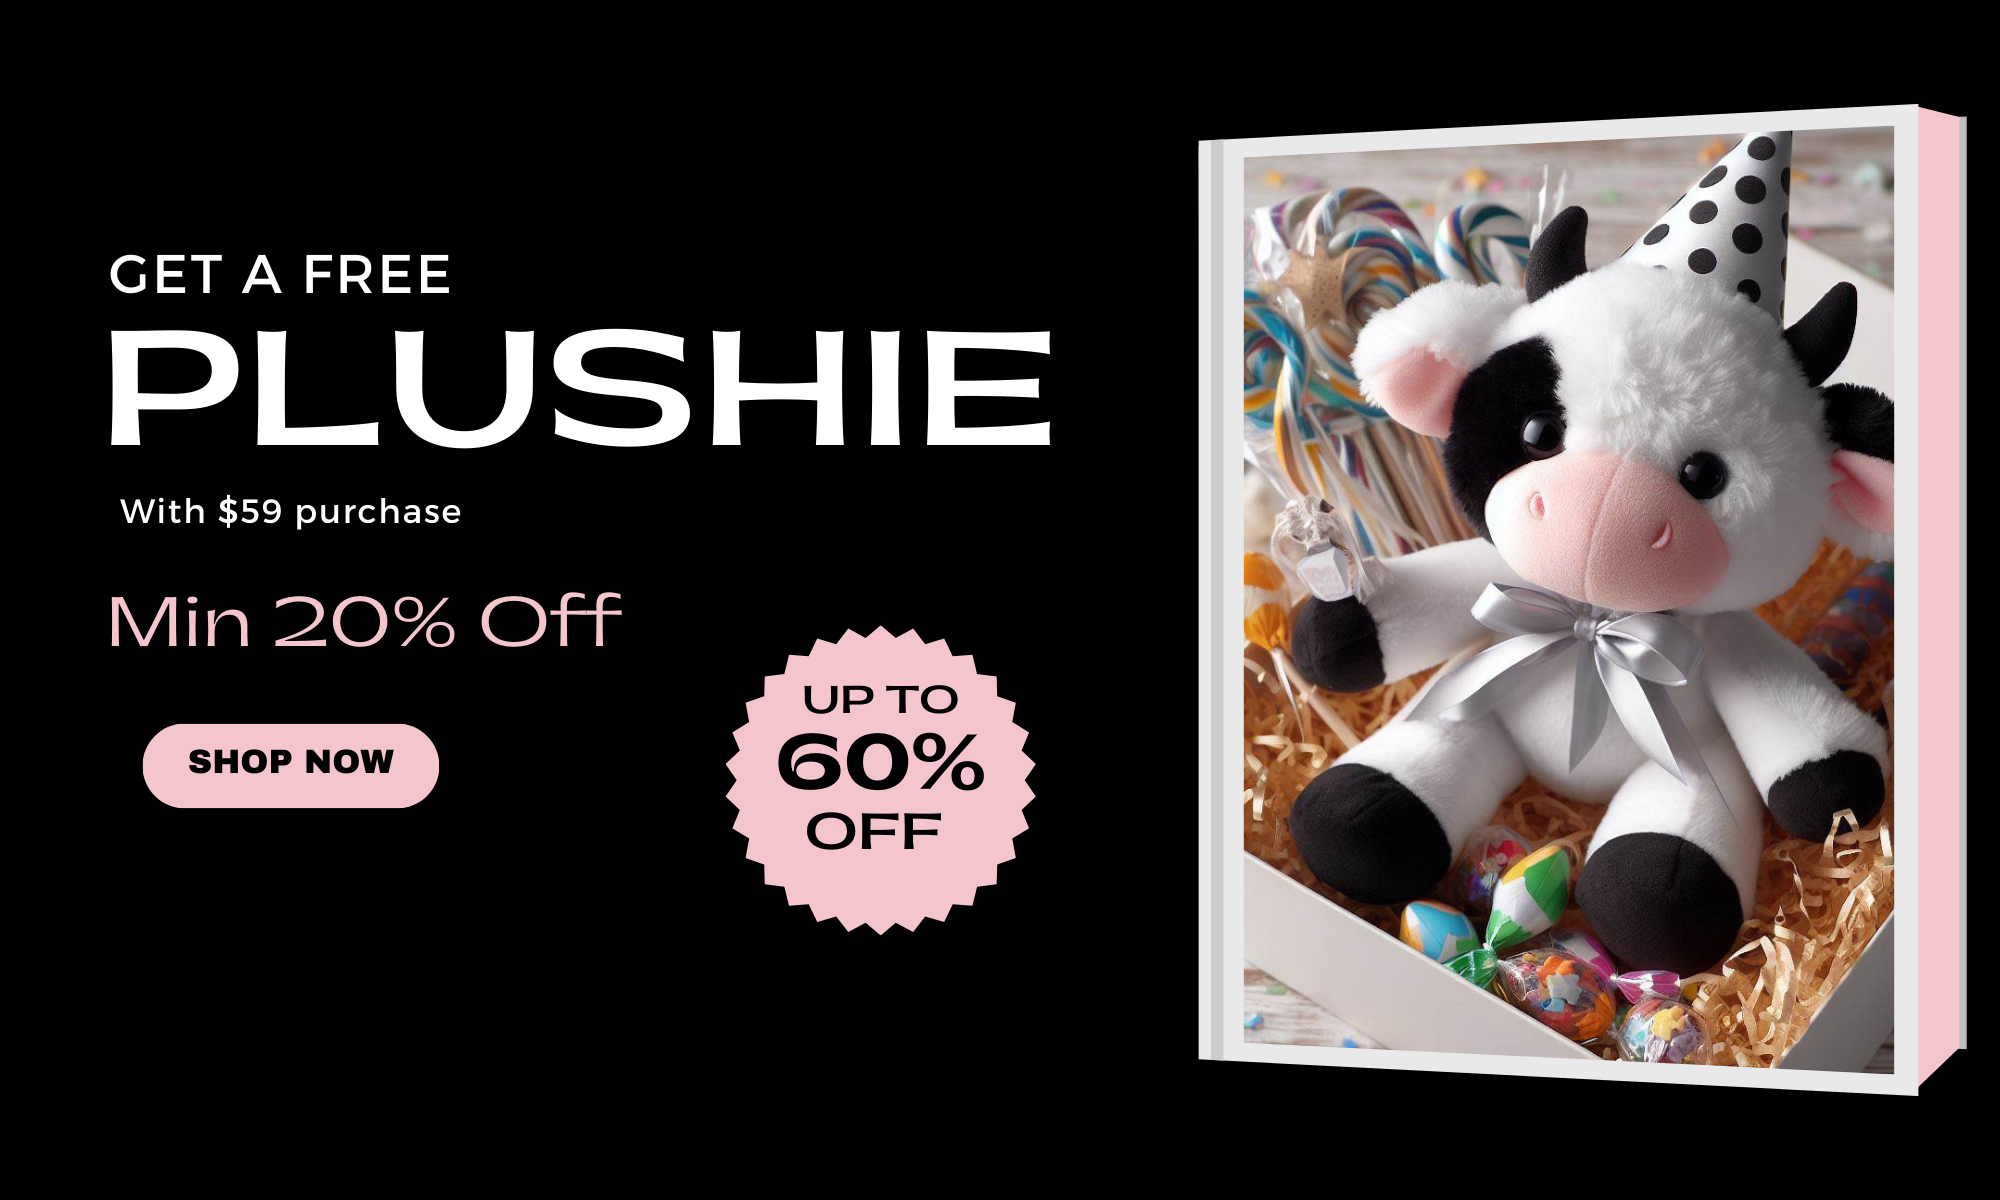 Black Friday Sale: Get a FREE Plushie | FLAT 20% OFF 